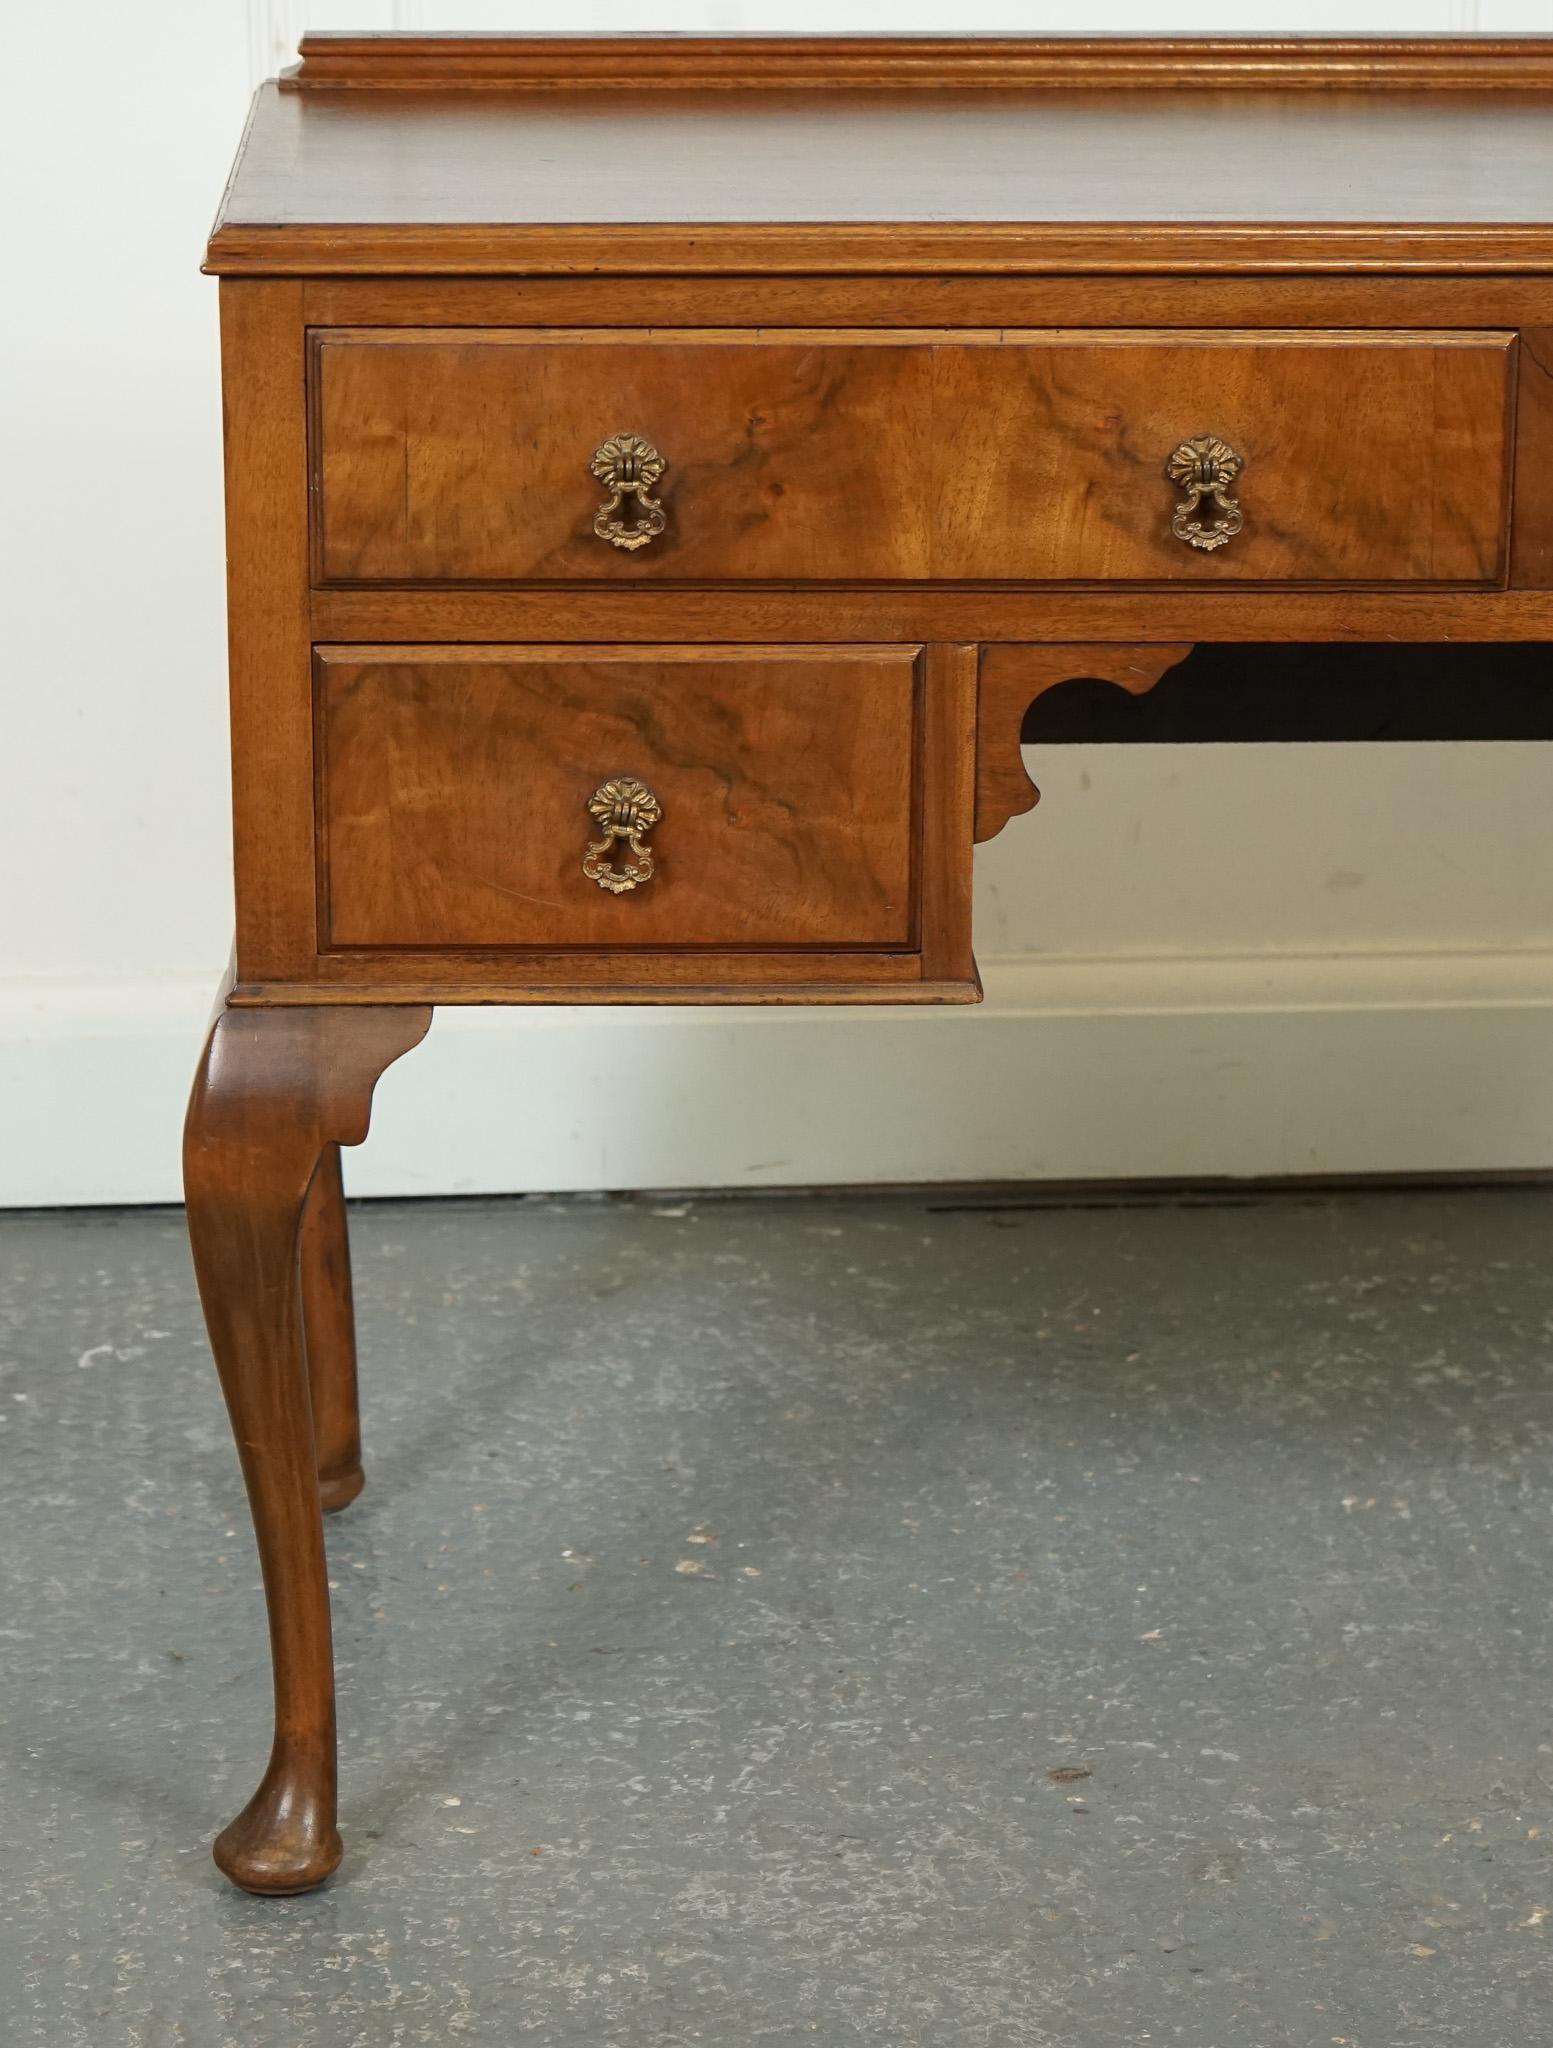 VINTAGE BURR WALNUT DRESSING TABLE DESK RAiSED ON QUEEN ANNE LEGS J1 In Good Condition For Sale In Pulborough, GB